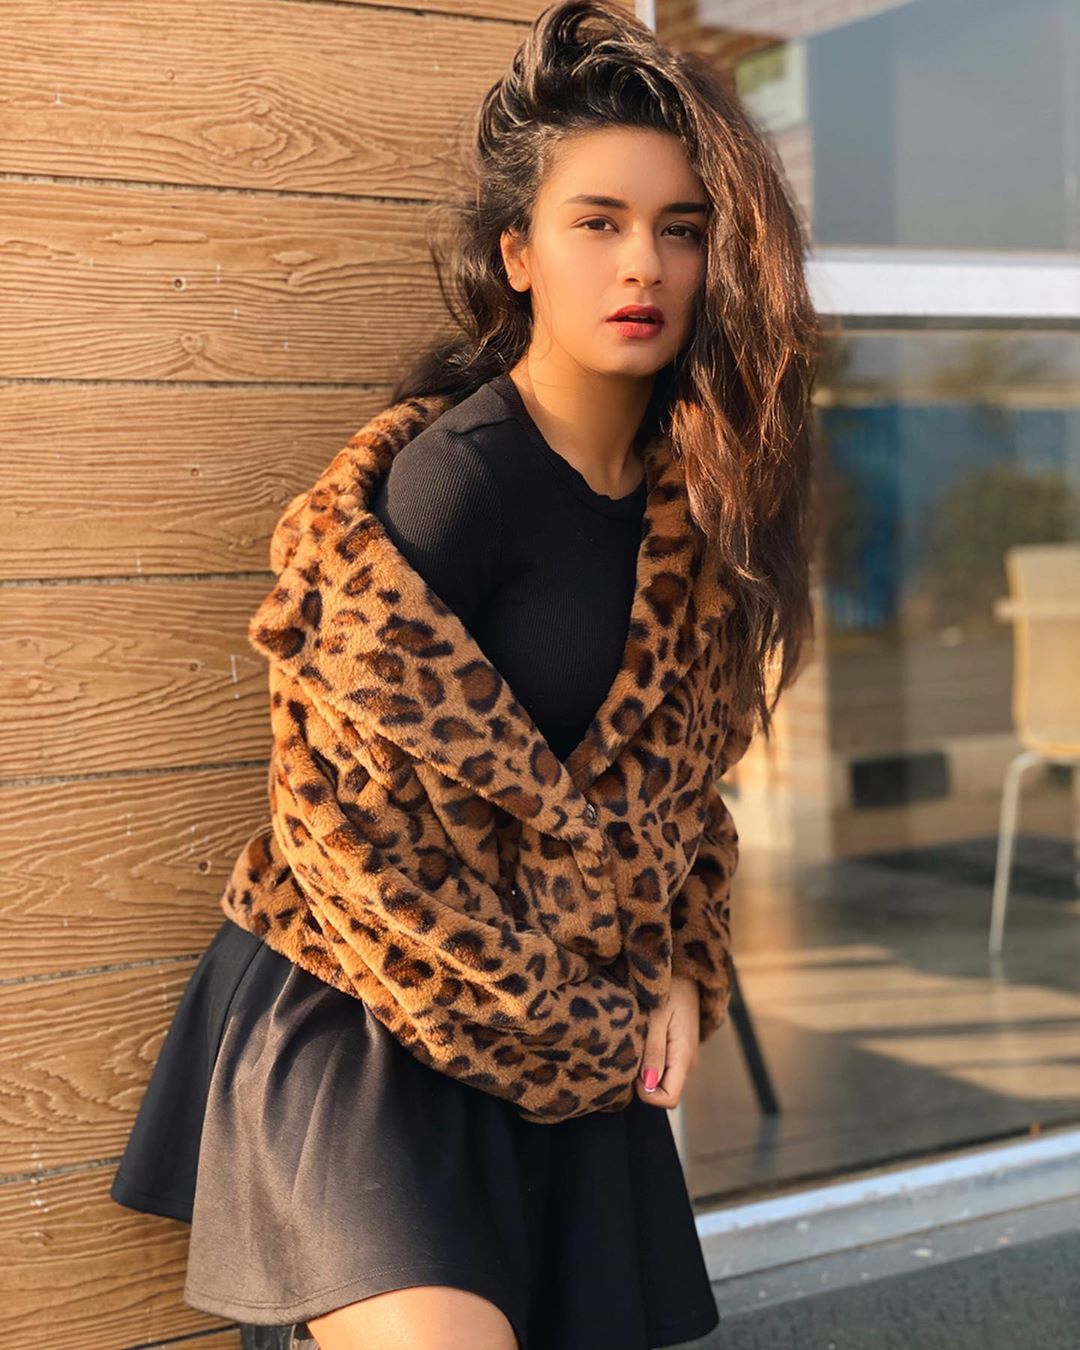 Avneet Kaur Wallpapers, Photos, Images & Pictures Babygirl, you’re the sun.
Stop giving your warmth if they can’t support your shine.
Wearing-  –